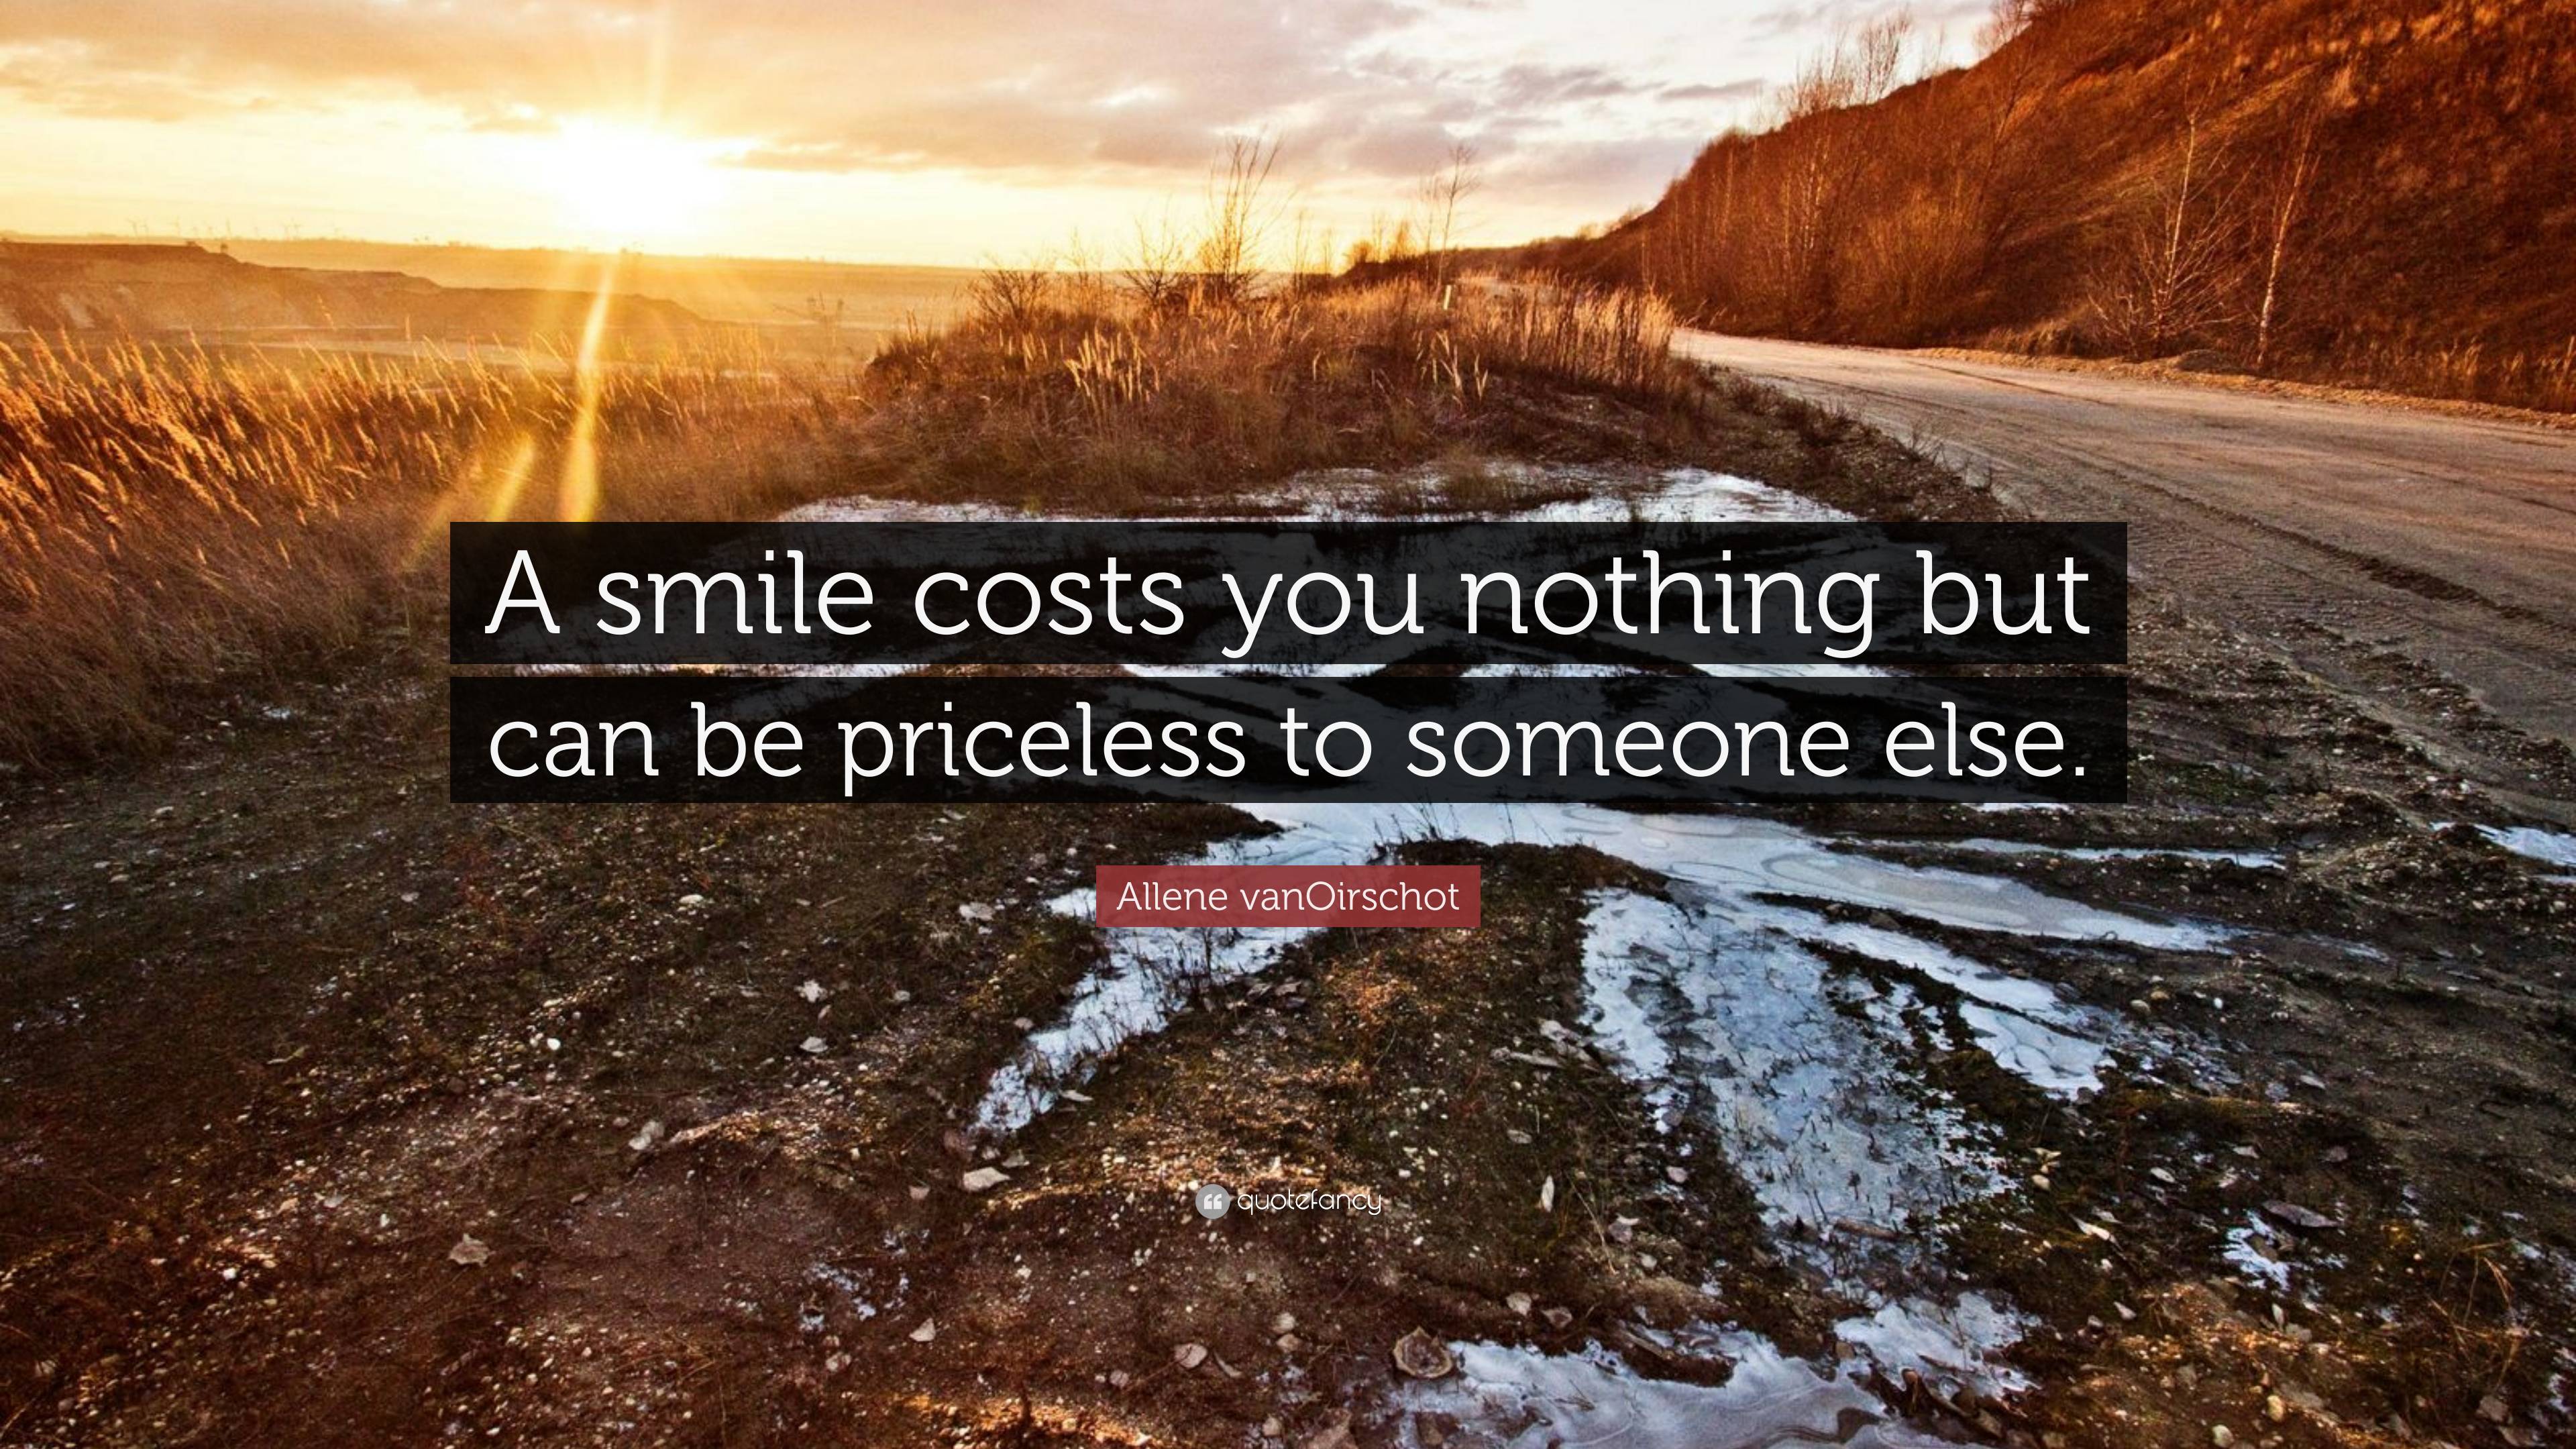 Allene Vanoirschot Quote “a Smile Costs You Nothing But Can Be Priceless To Someone Else” 